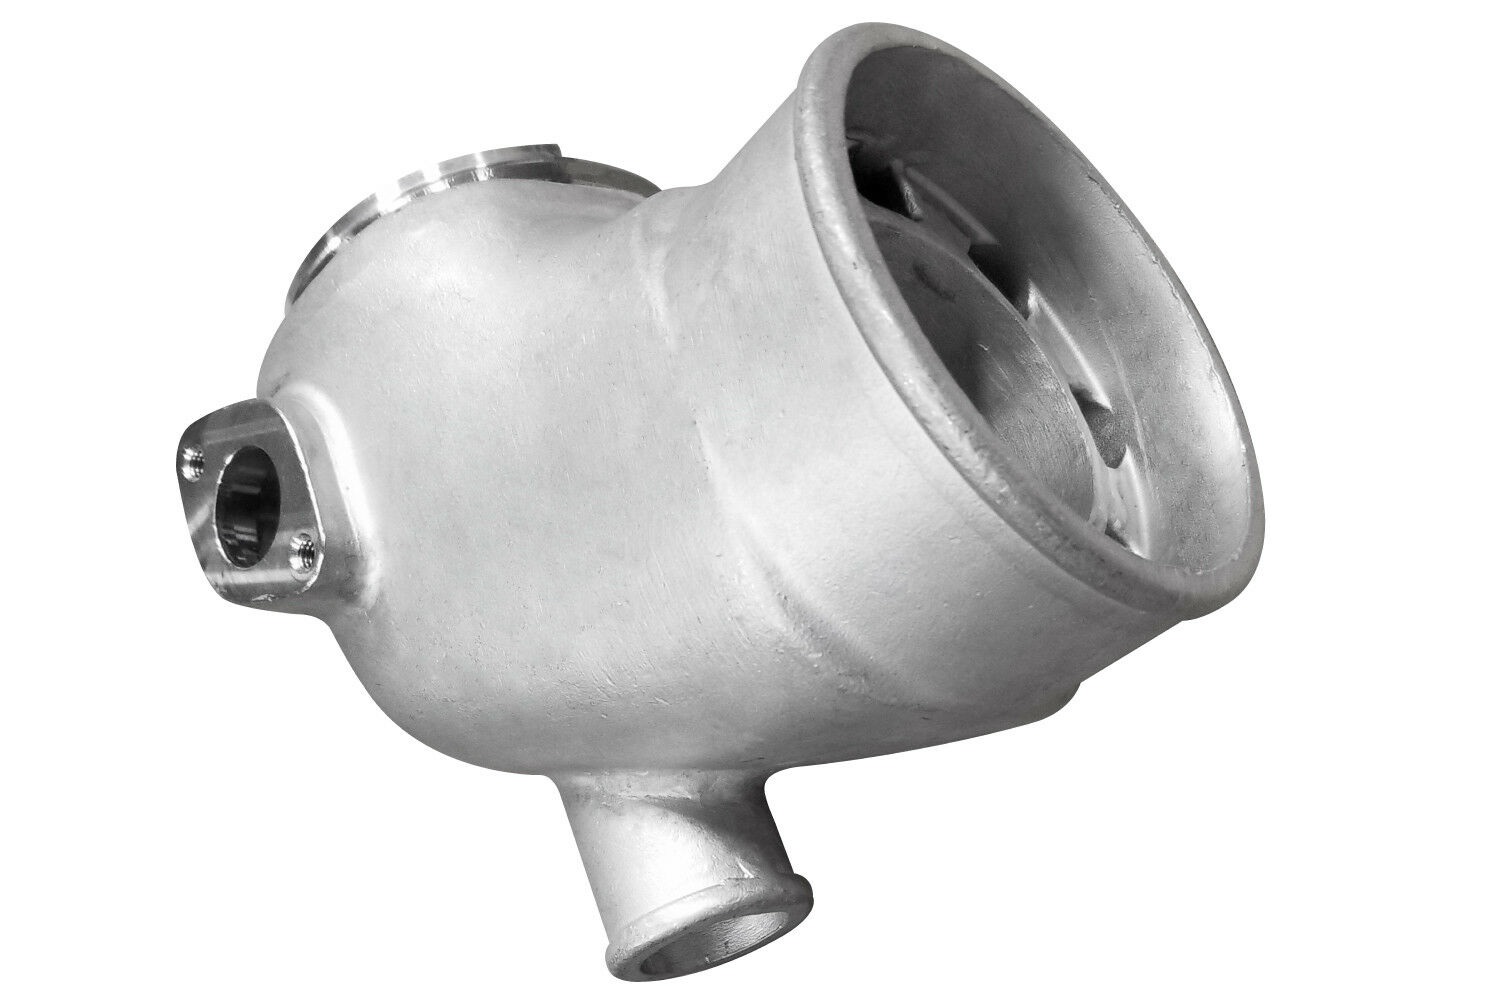 Vg1 Stainless Steel Mixing Elbow Replaces Volvo Penta Pn: 861289